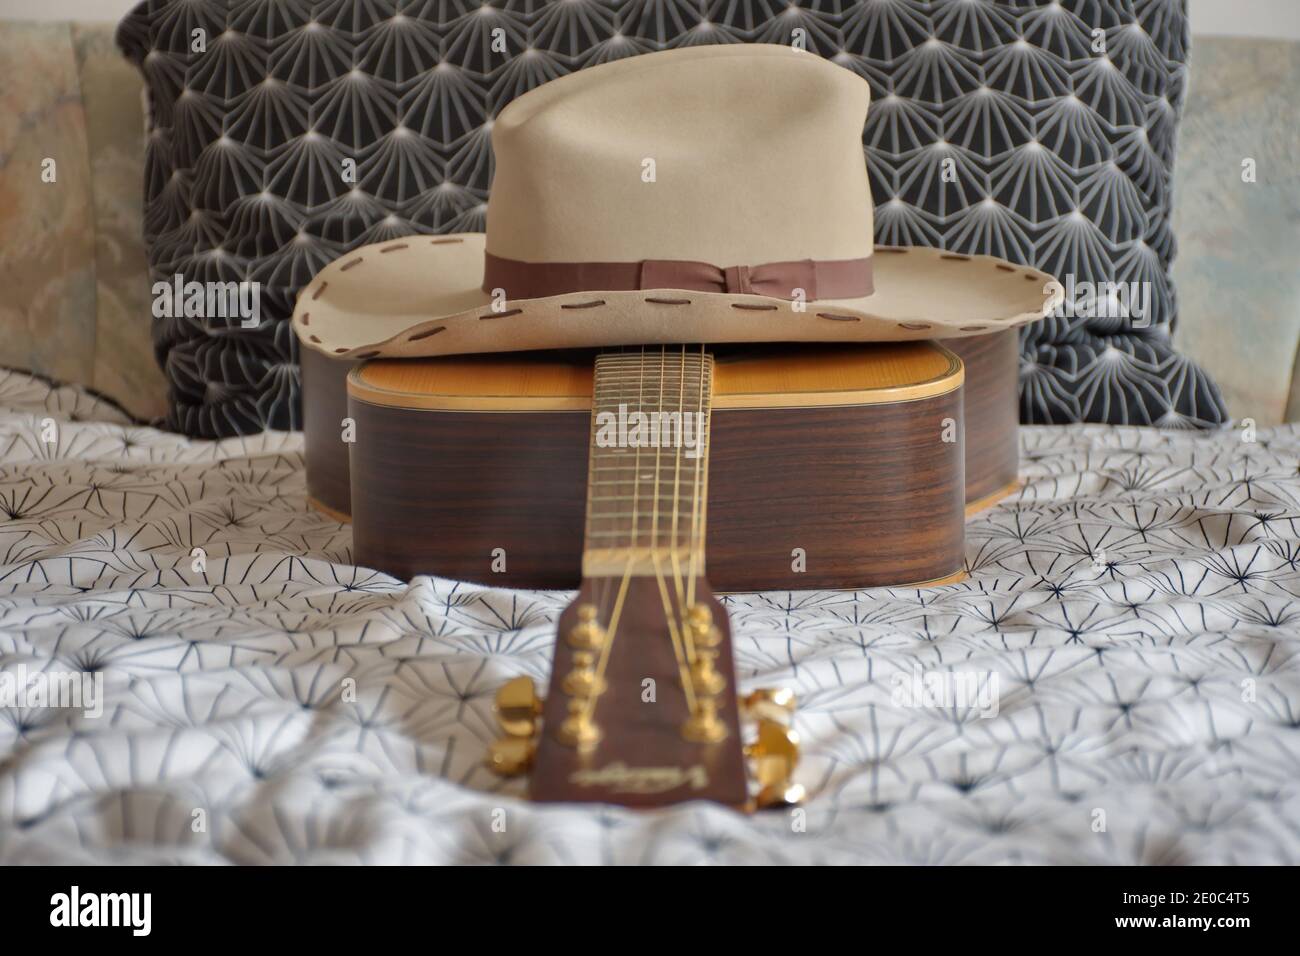 Acoustic folk guitar and cowboy hat on the bed Stock Photo